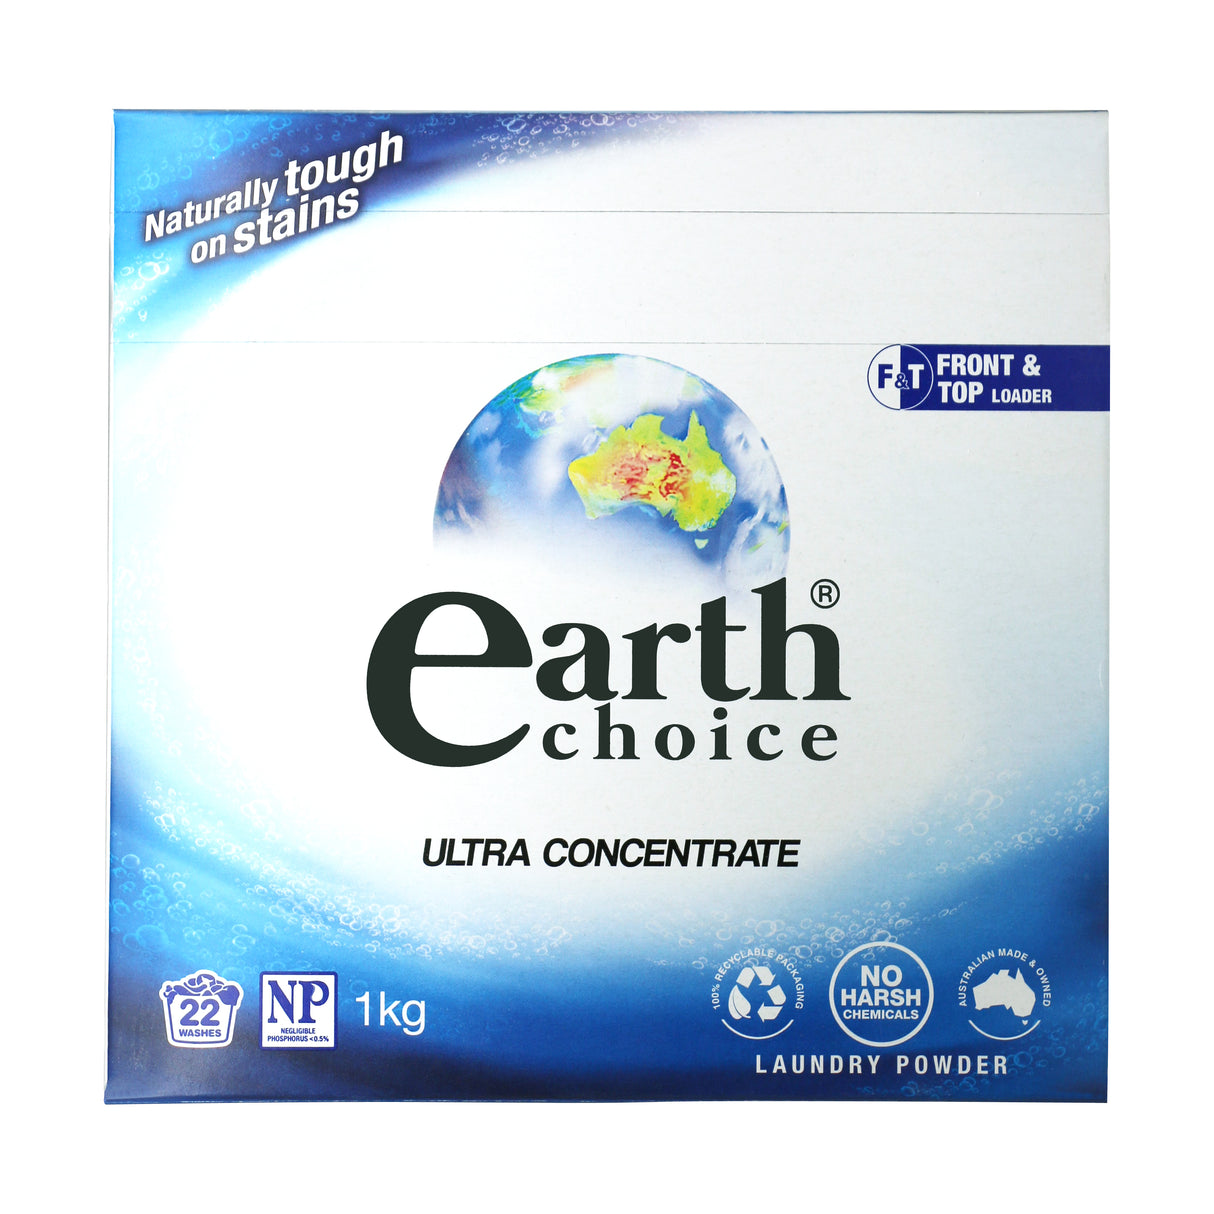 Earth Choice Laundry Powder Top & Front Loader 1kg